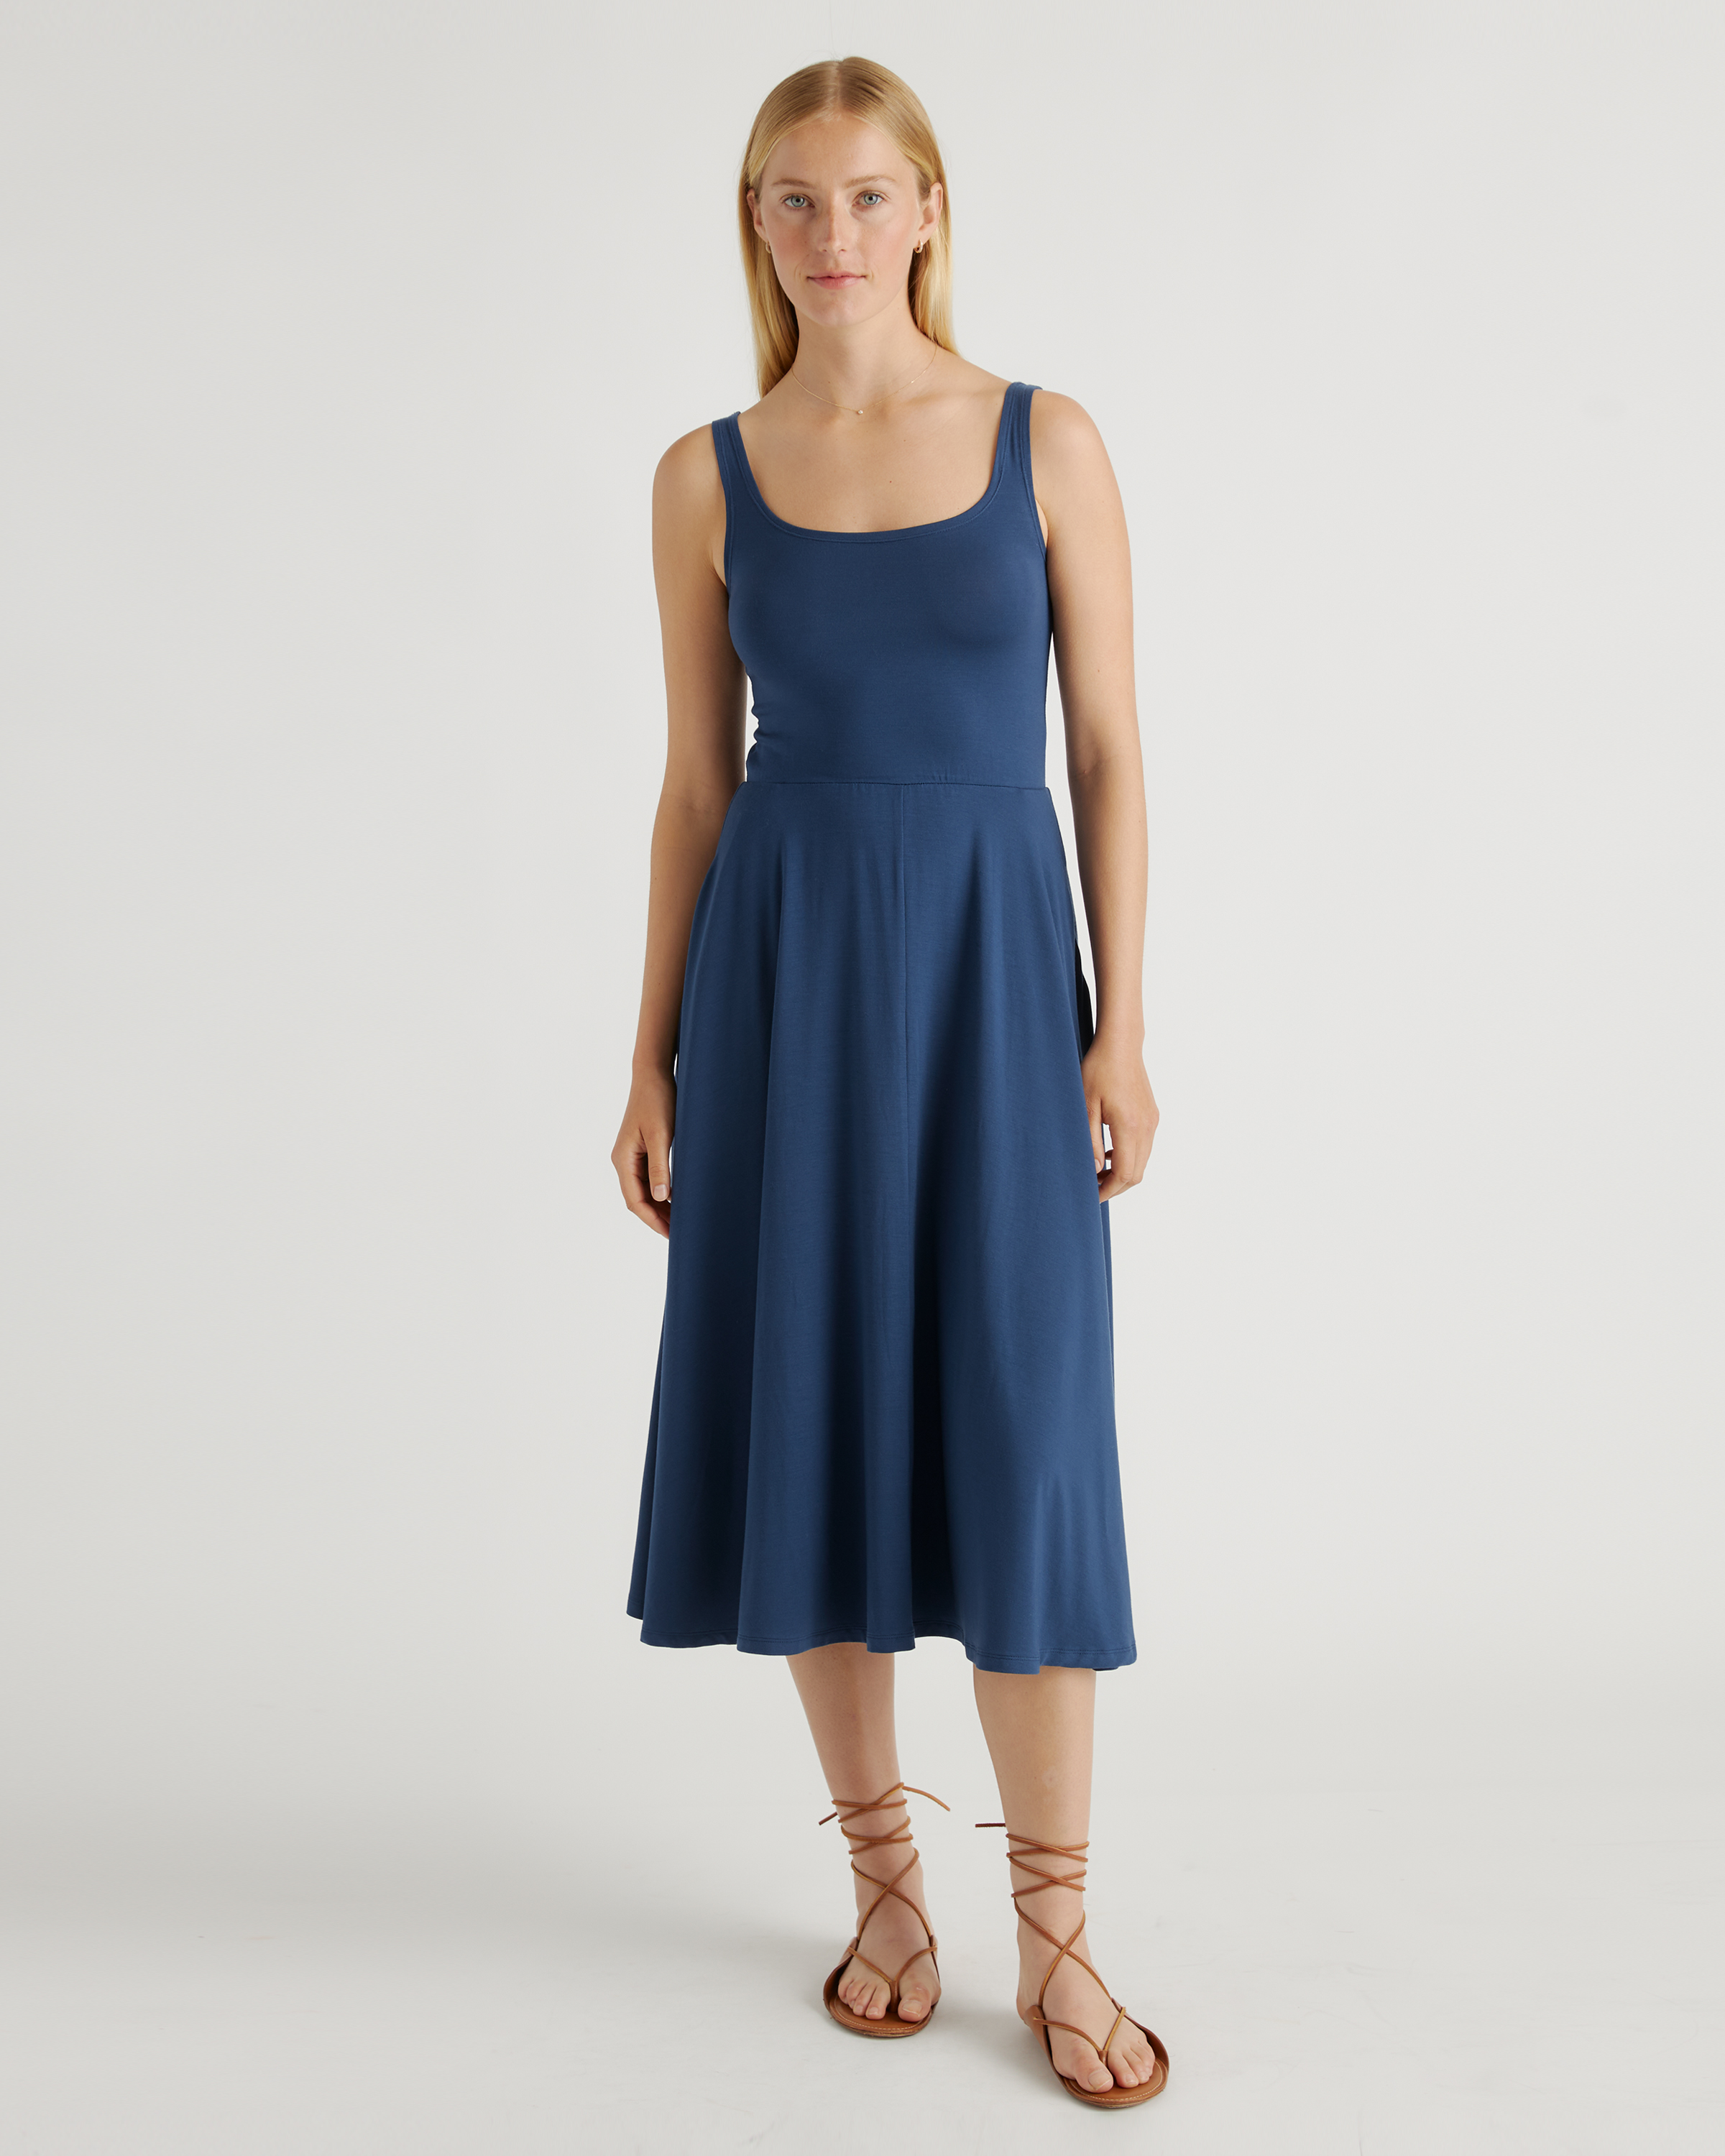 Women's Clearance Fit & Flare Open-back Dress made with Organic Cotton